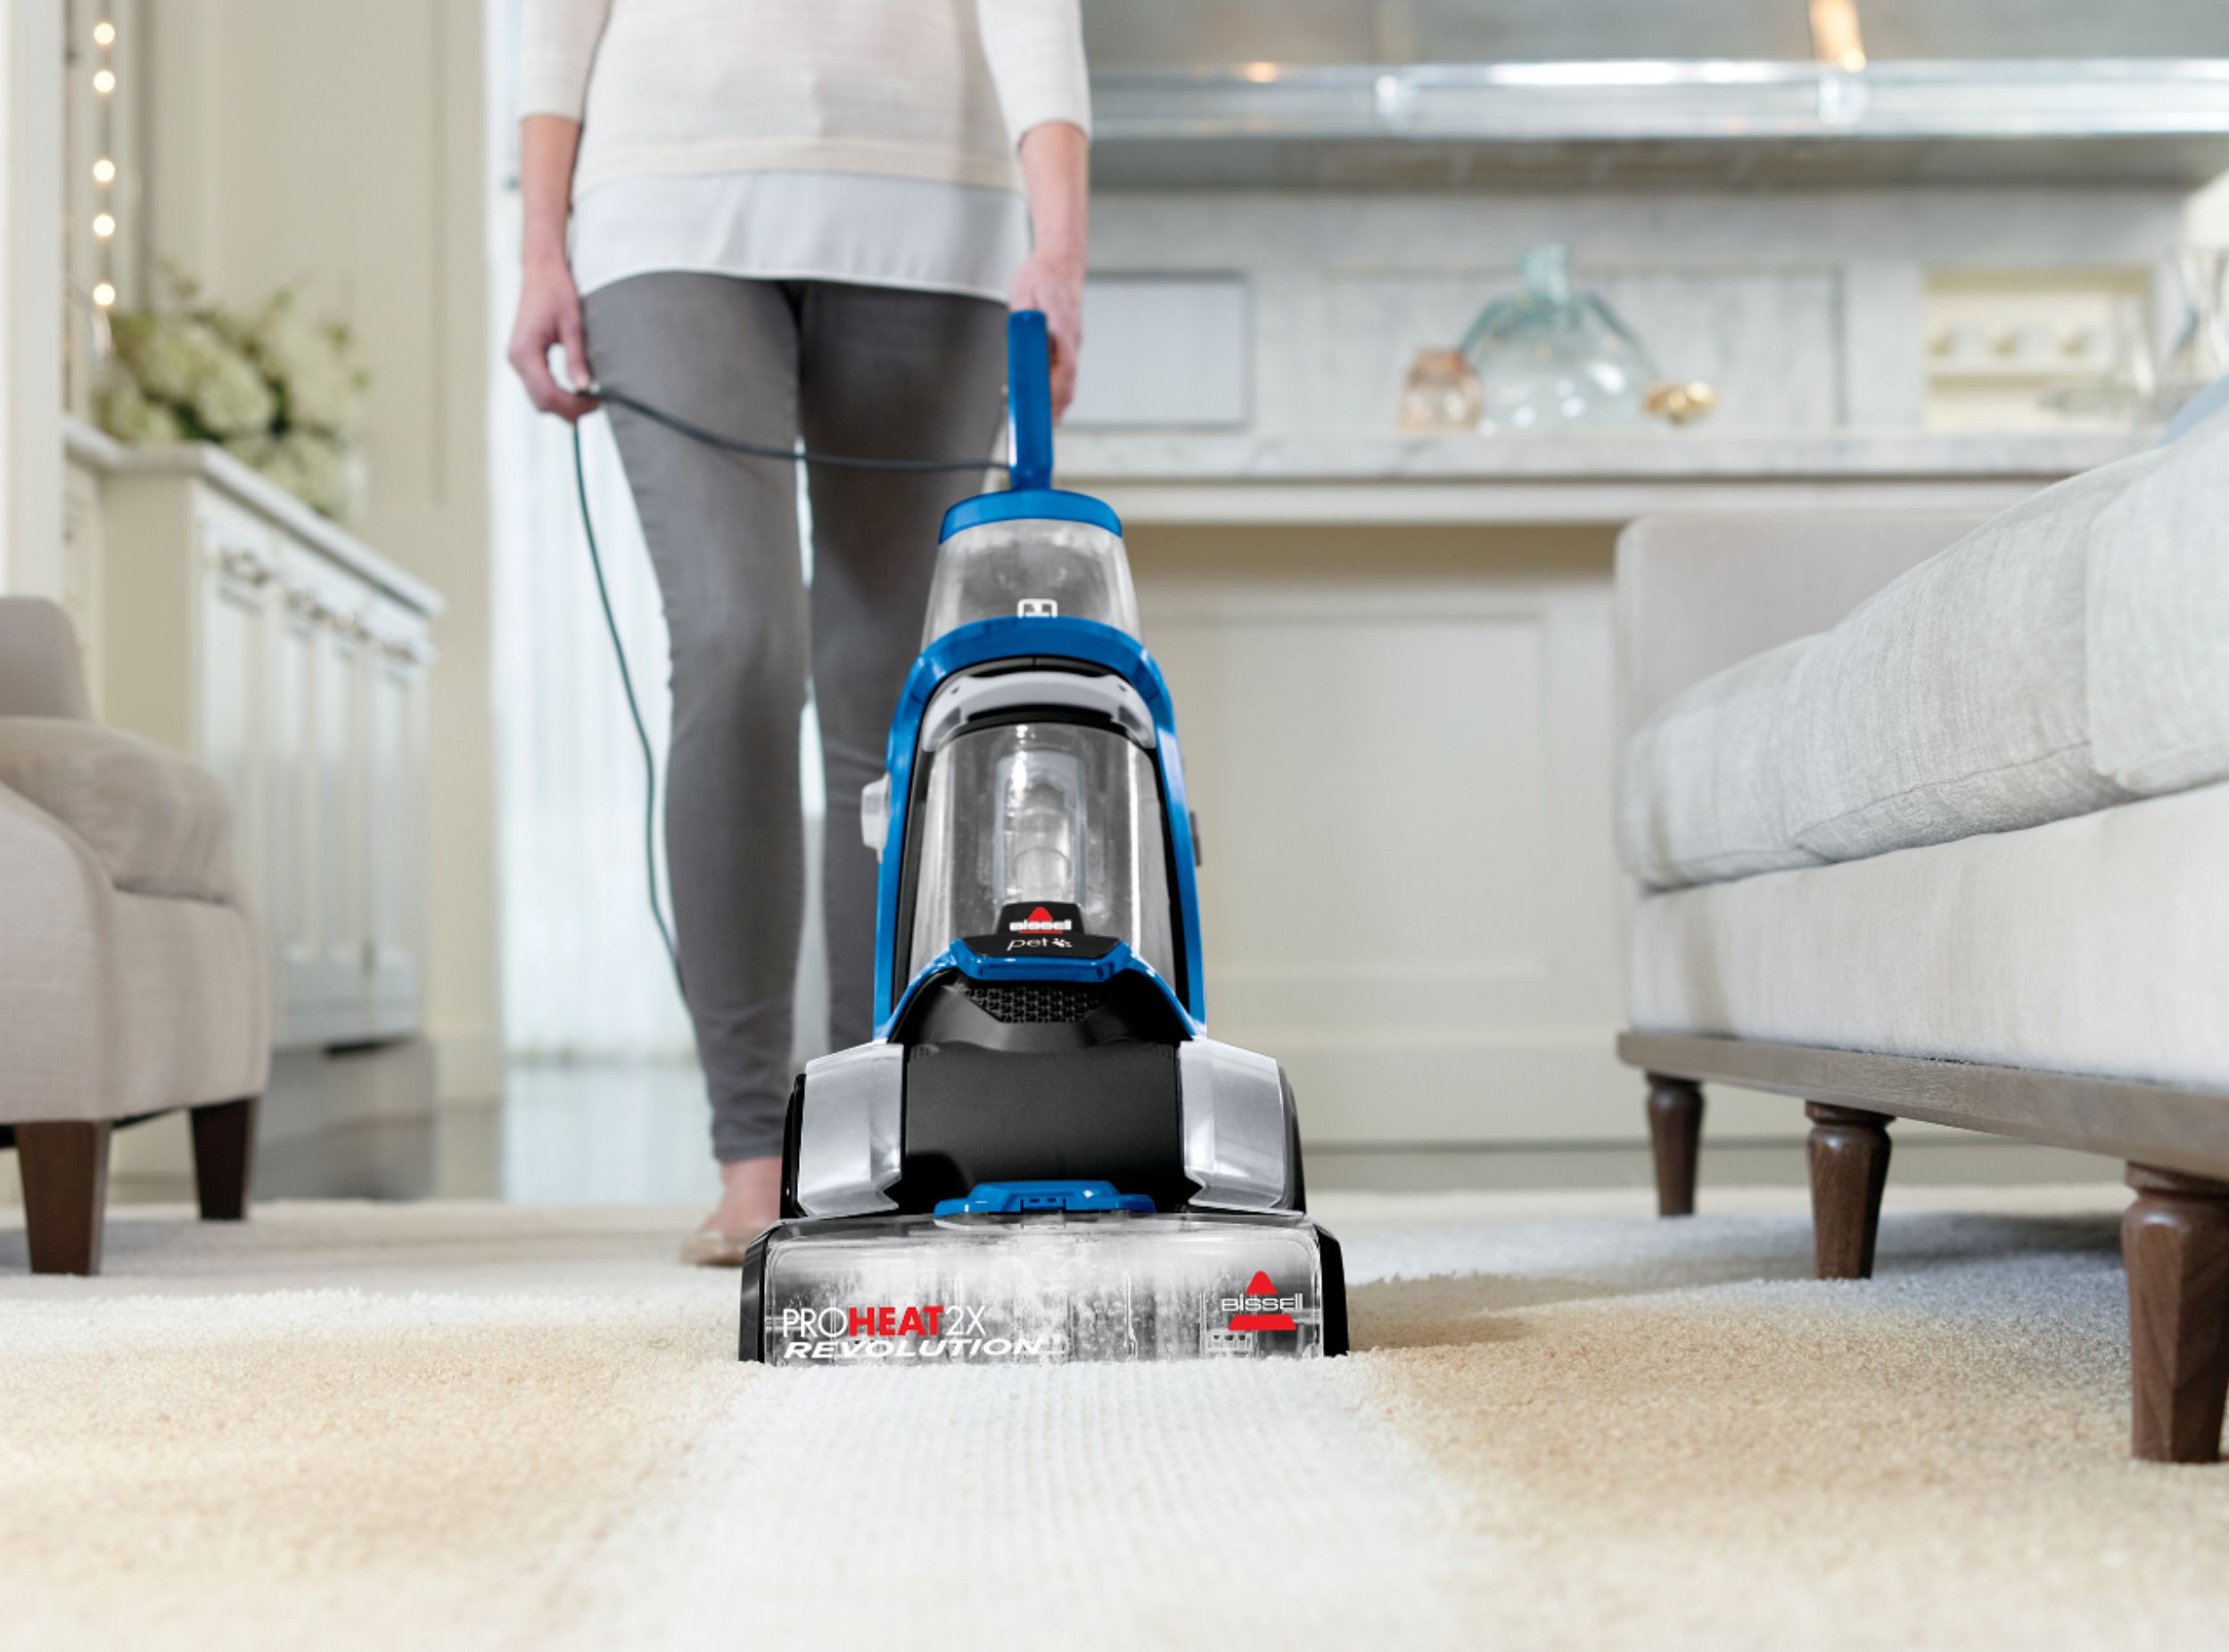 Bissell's ProHeat 2X Revolution Pet Pro Carpet Cleaner is 18% off